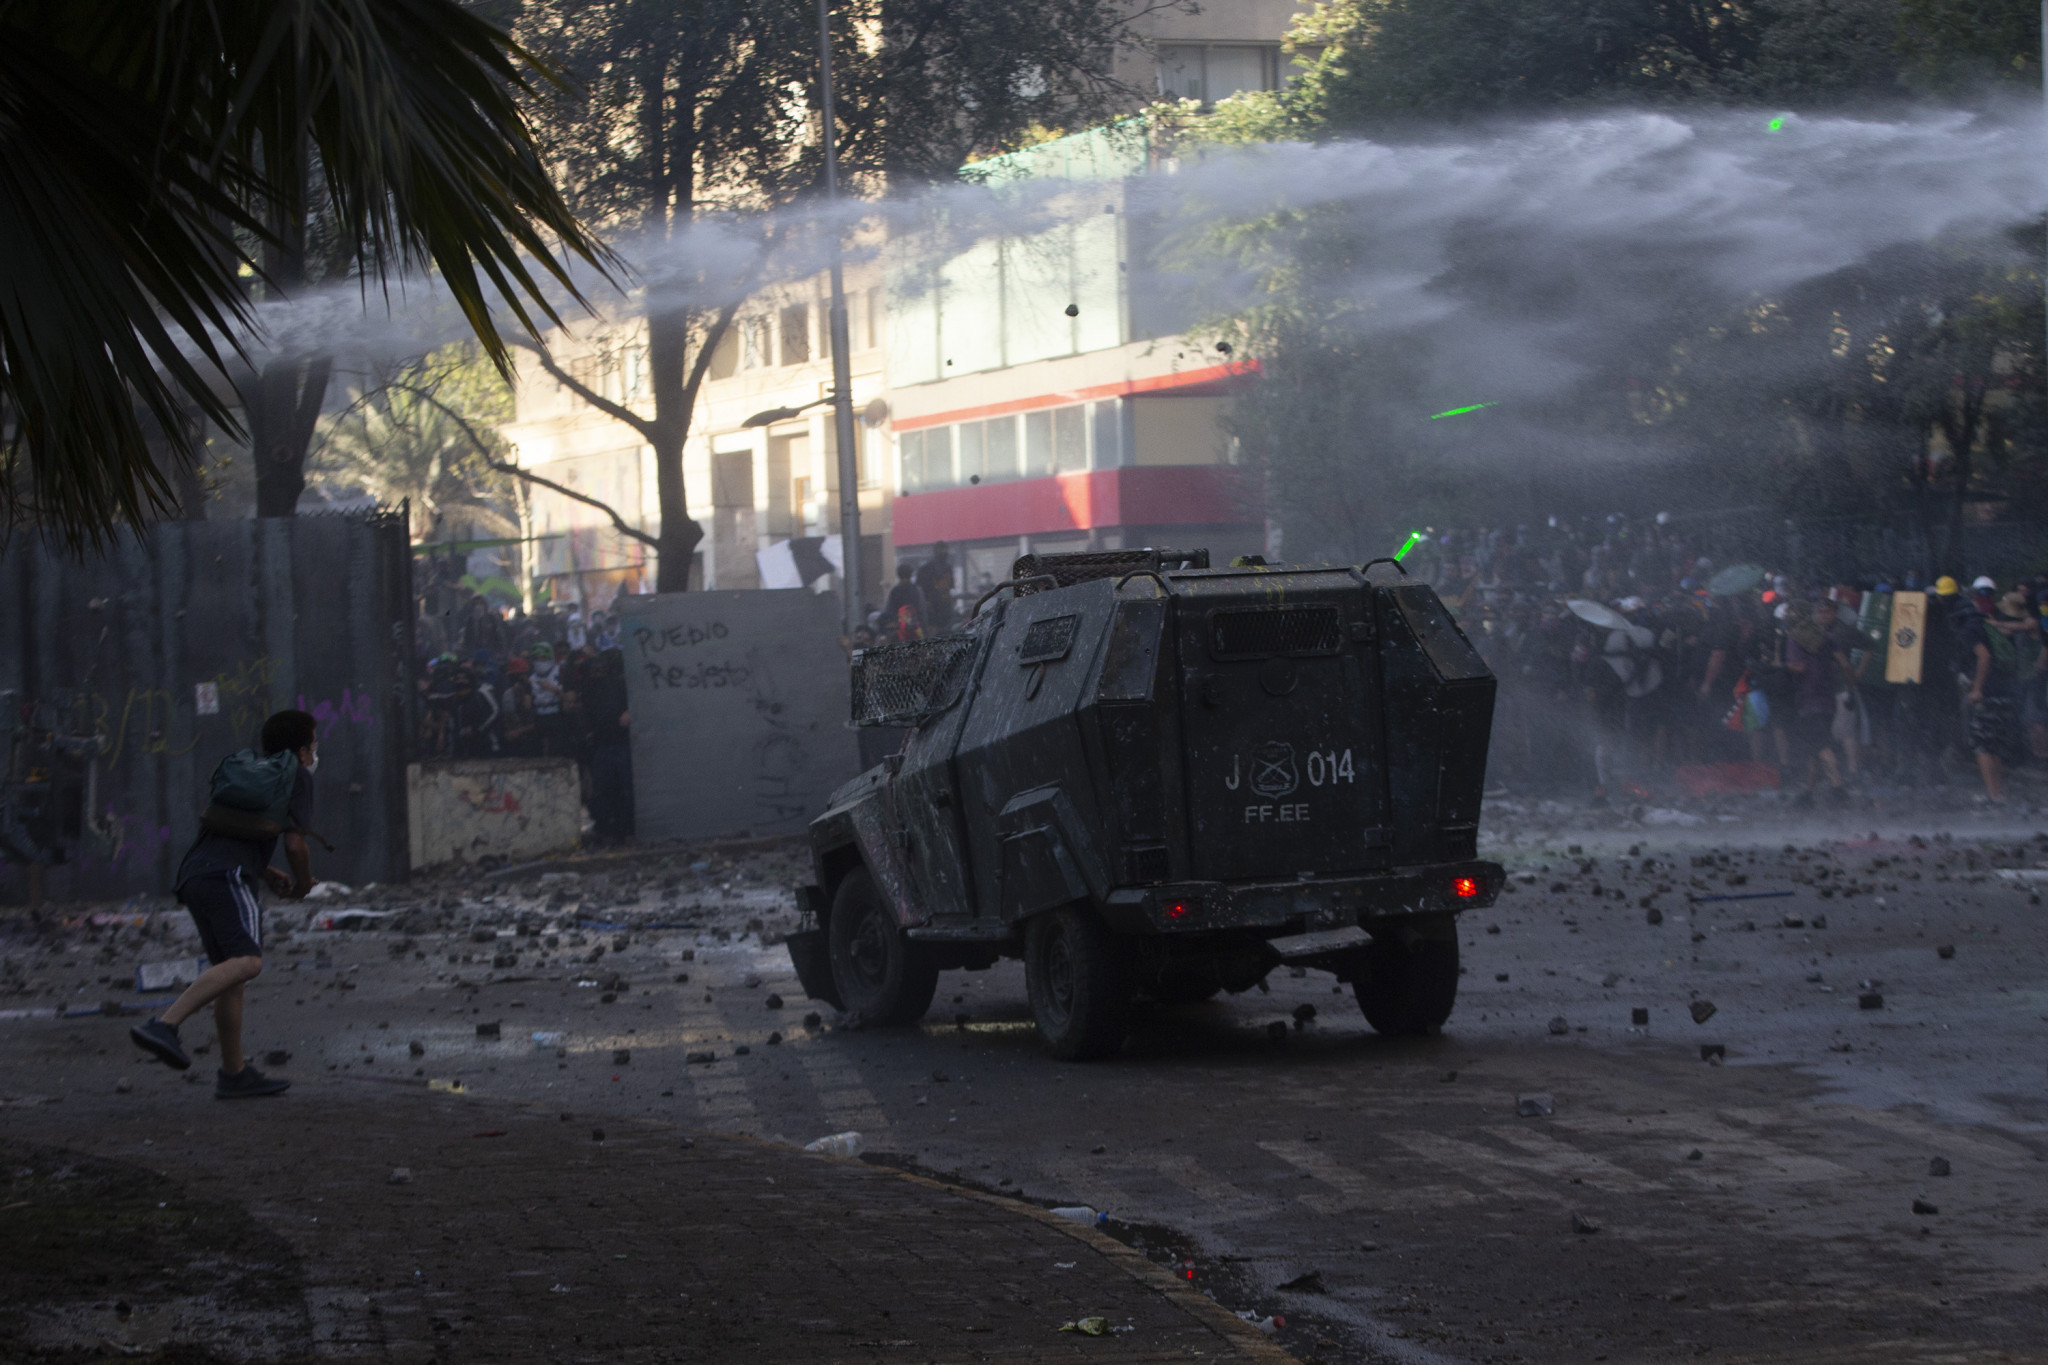 Chile has been hit by social unrest in recent months with protests against the country's Government ©Getty Images